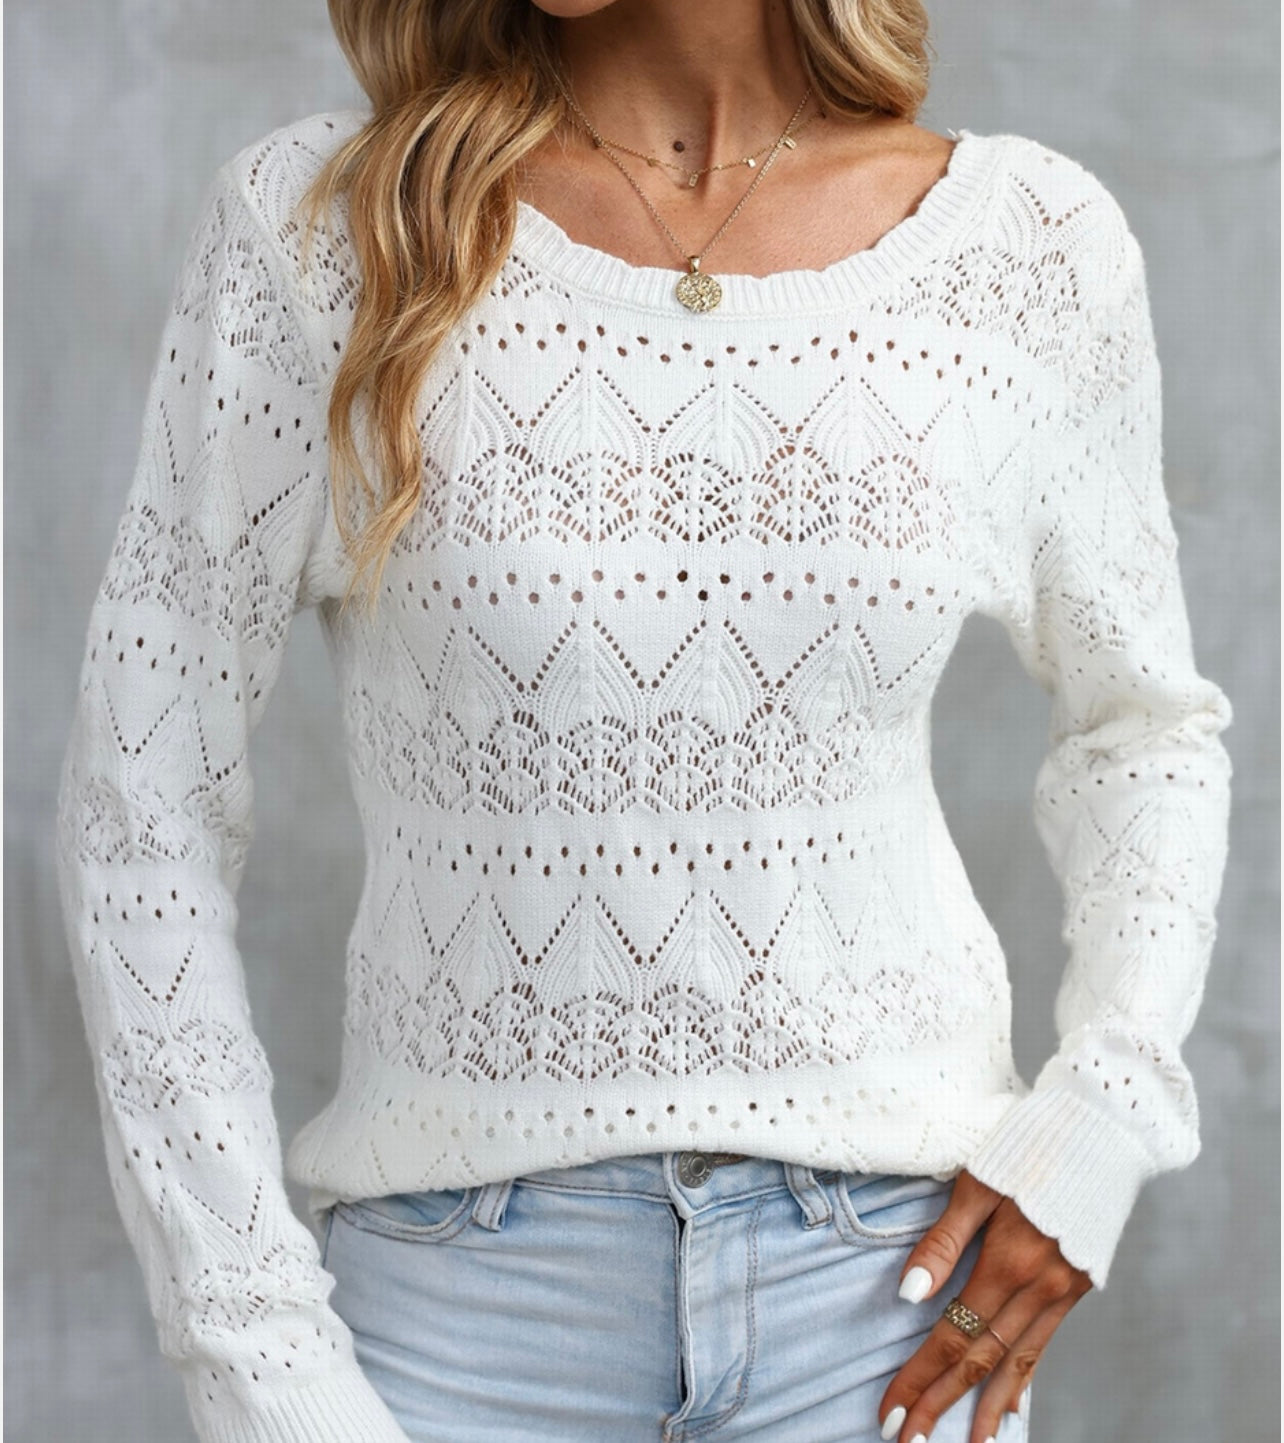 Pointelle Patterned Knit Top